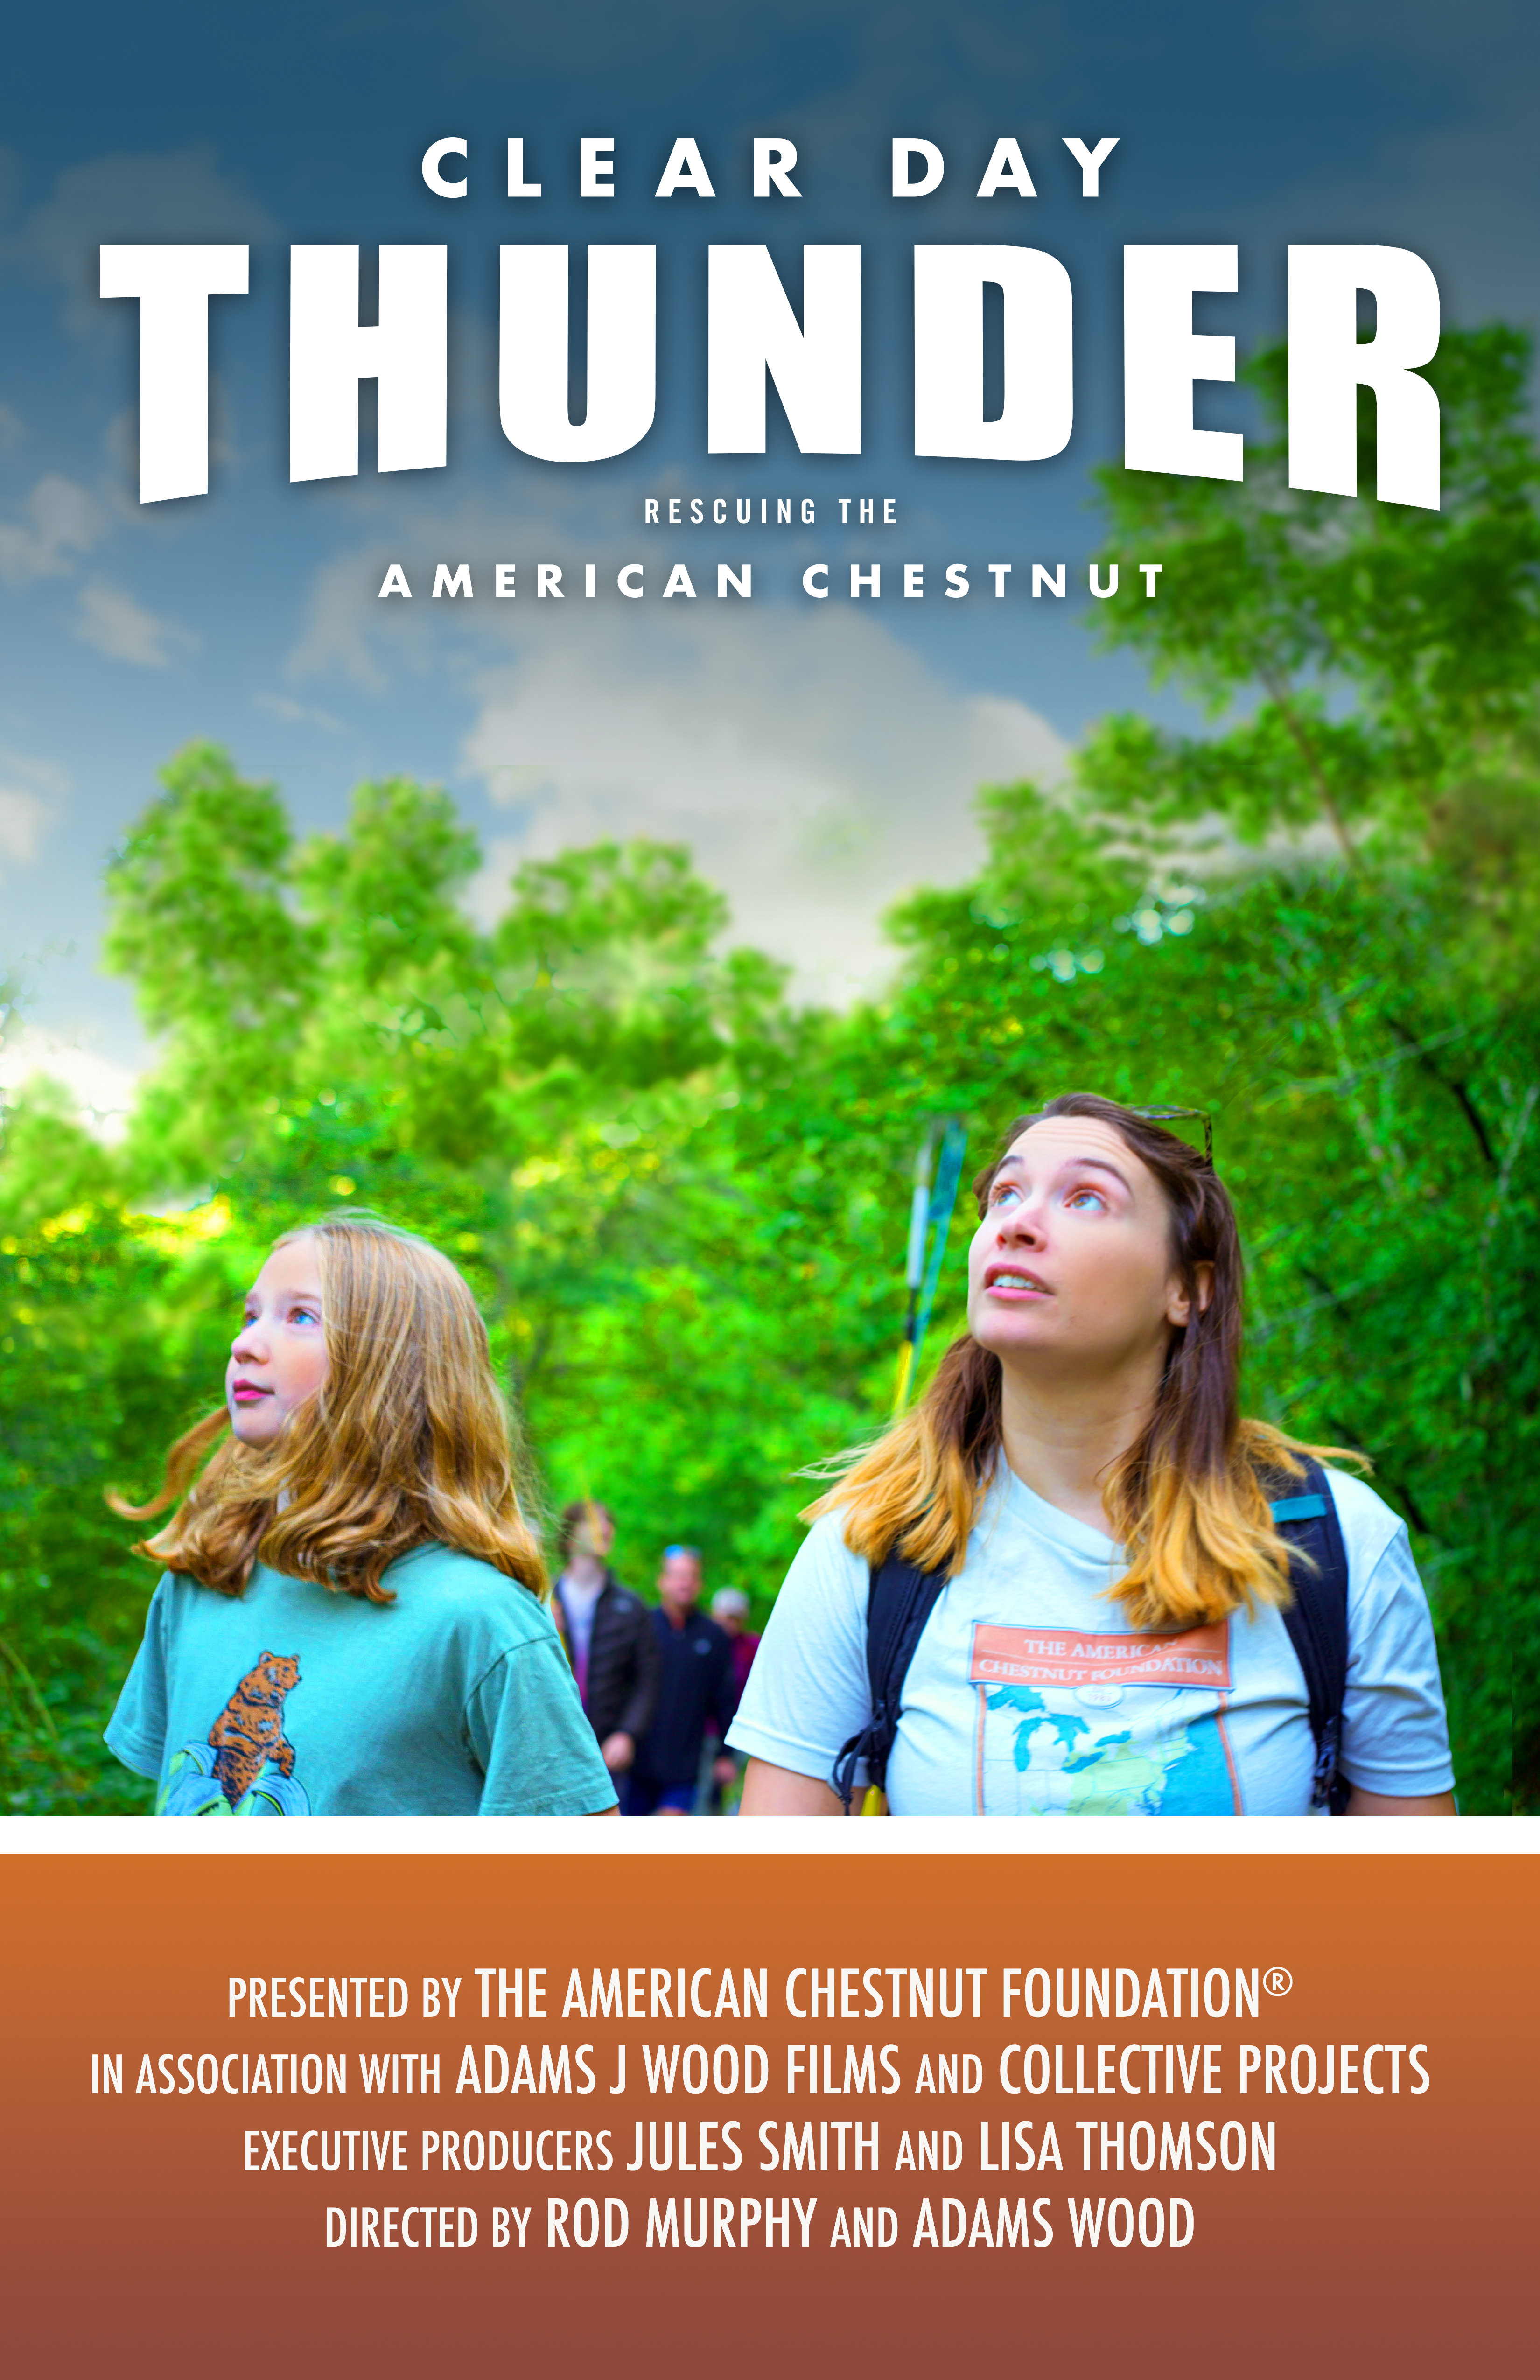 Film Poster for CLEAR DAY THUNDER: Rescuing the American Chestnut